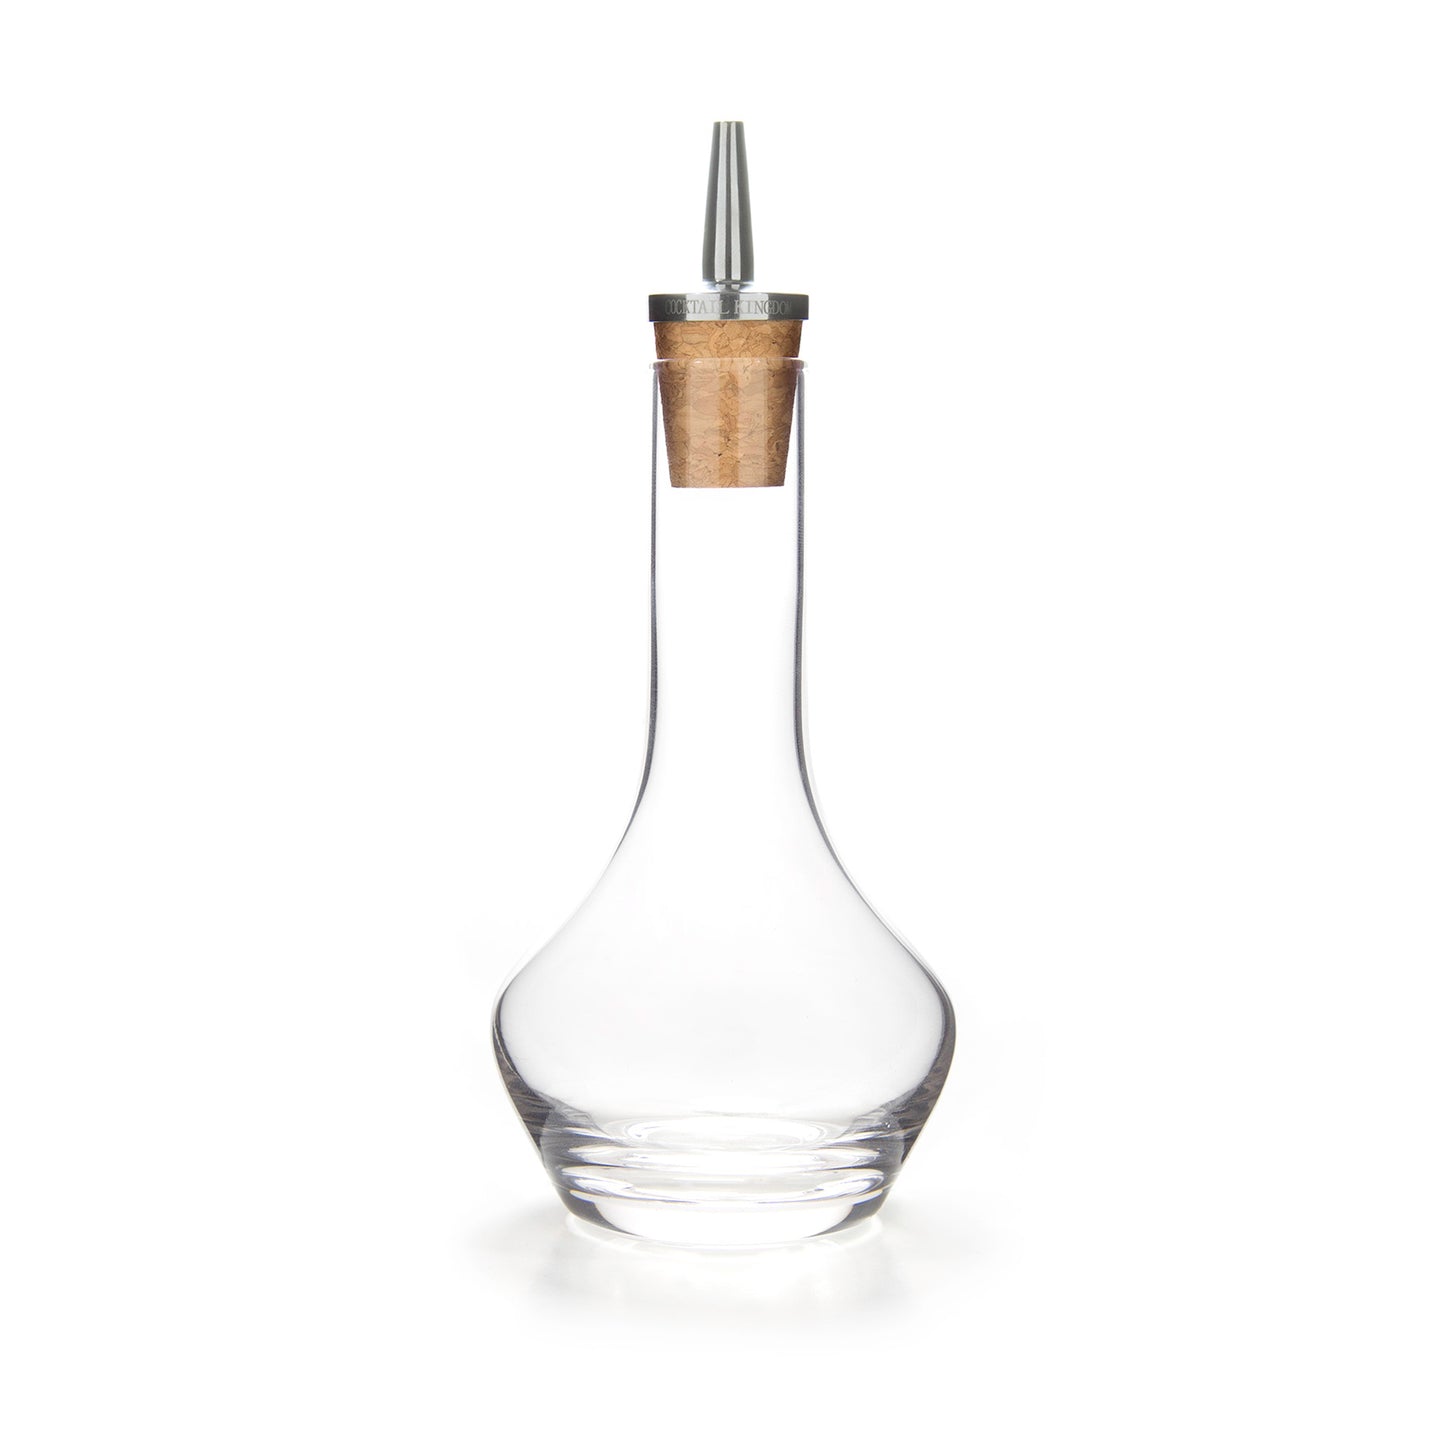 BITTERS BOTTLE – STAINLESS STEEL DASHER TOP / 100ml (3.4oz)